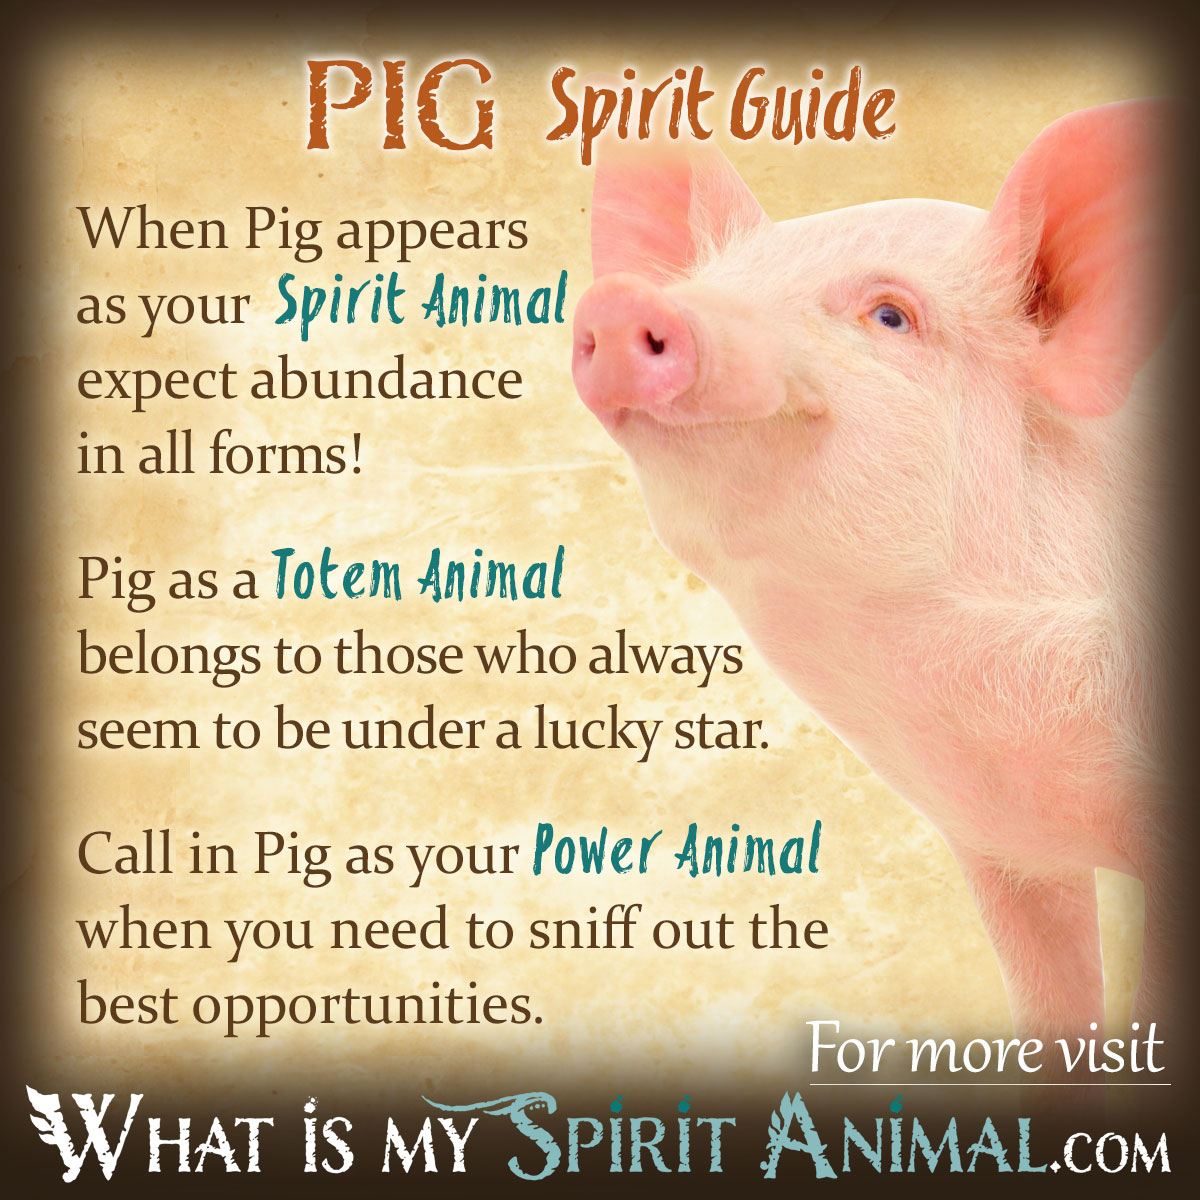 What does a pig usually symbolize?